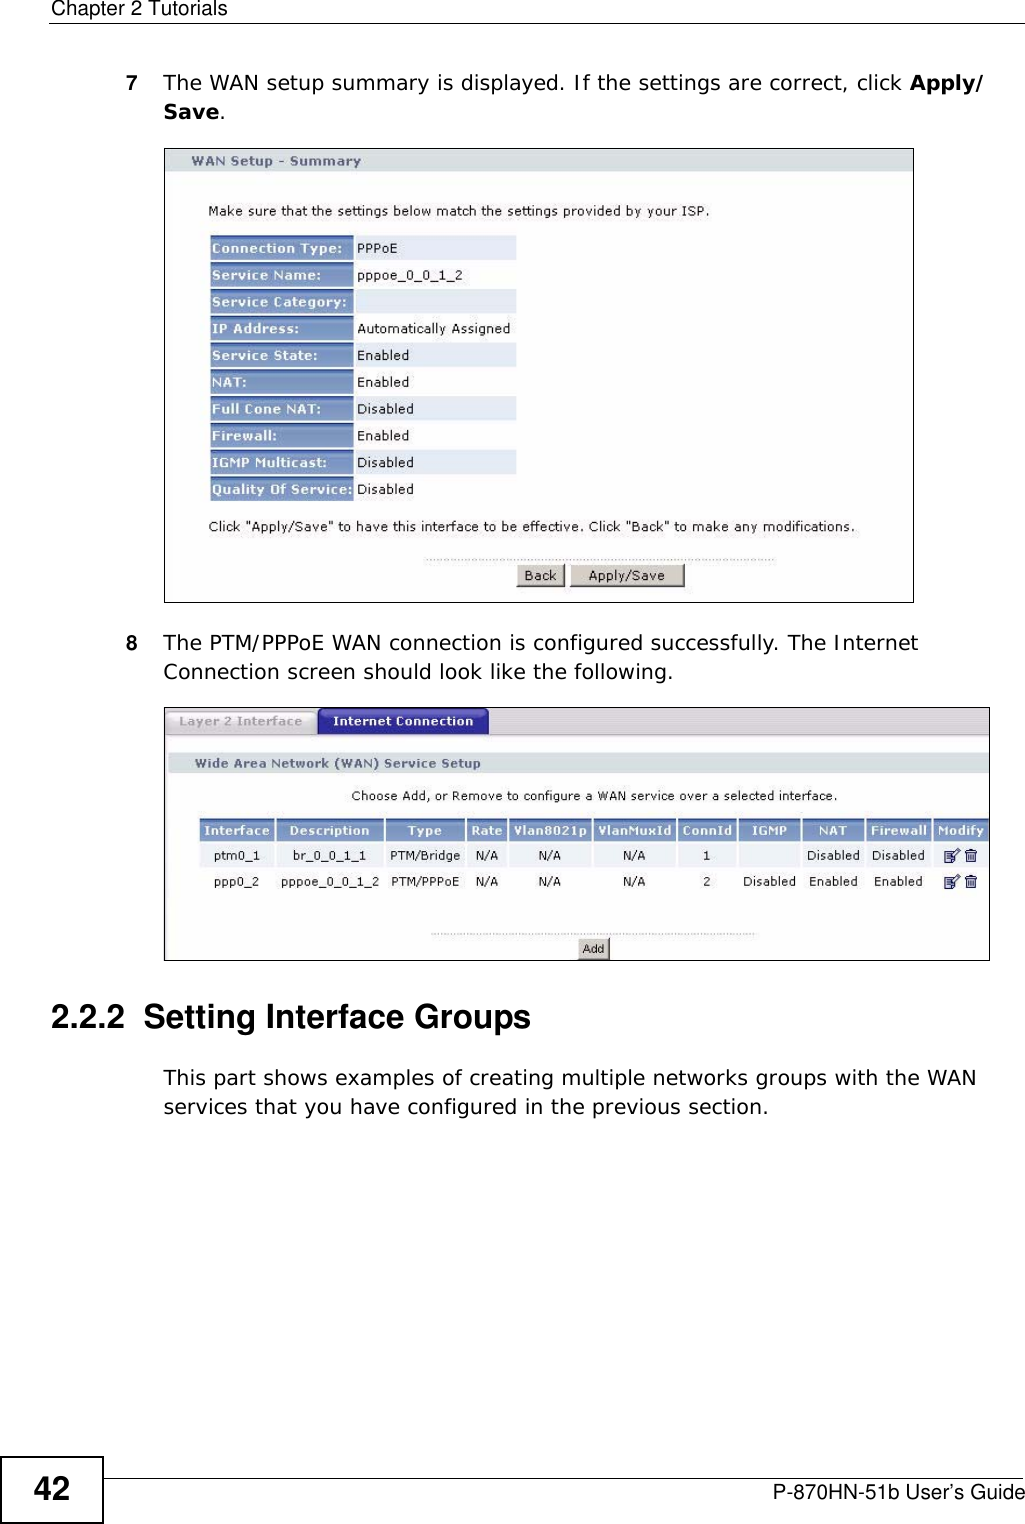 Chapter 2 TutorialsP-870HN-51b User’s Guide427The WAN setup summary is displayed. If the settings are correct, click Apply/Save. 8The PTM/PPPoE WAN connection is configured successfully. The Internet Connection screen should look like the following.2.2.2  Setting Interface GroupsThis part shows examples of creating multiple networks groups with the WAN services that you have configured in the previous section.